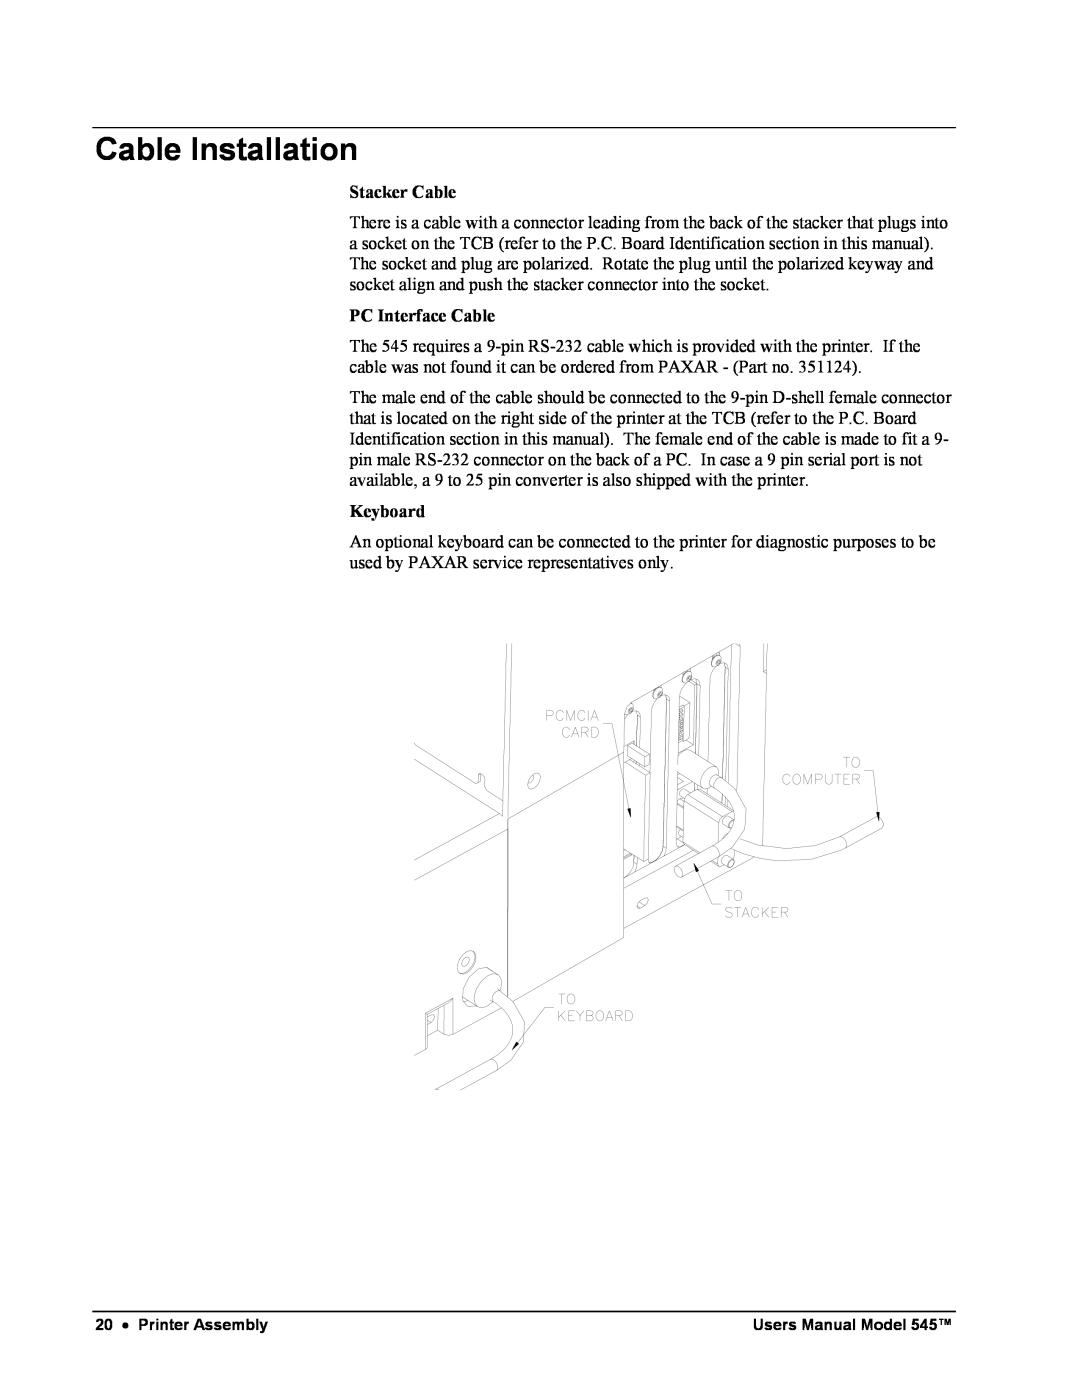 Paxar 545 user manual Cable Installation, Stacker Cable, PC Interface Cable, Keyboard 